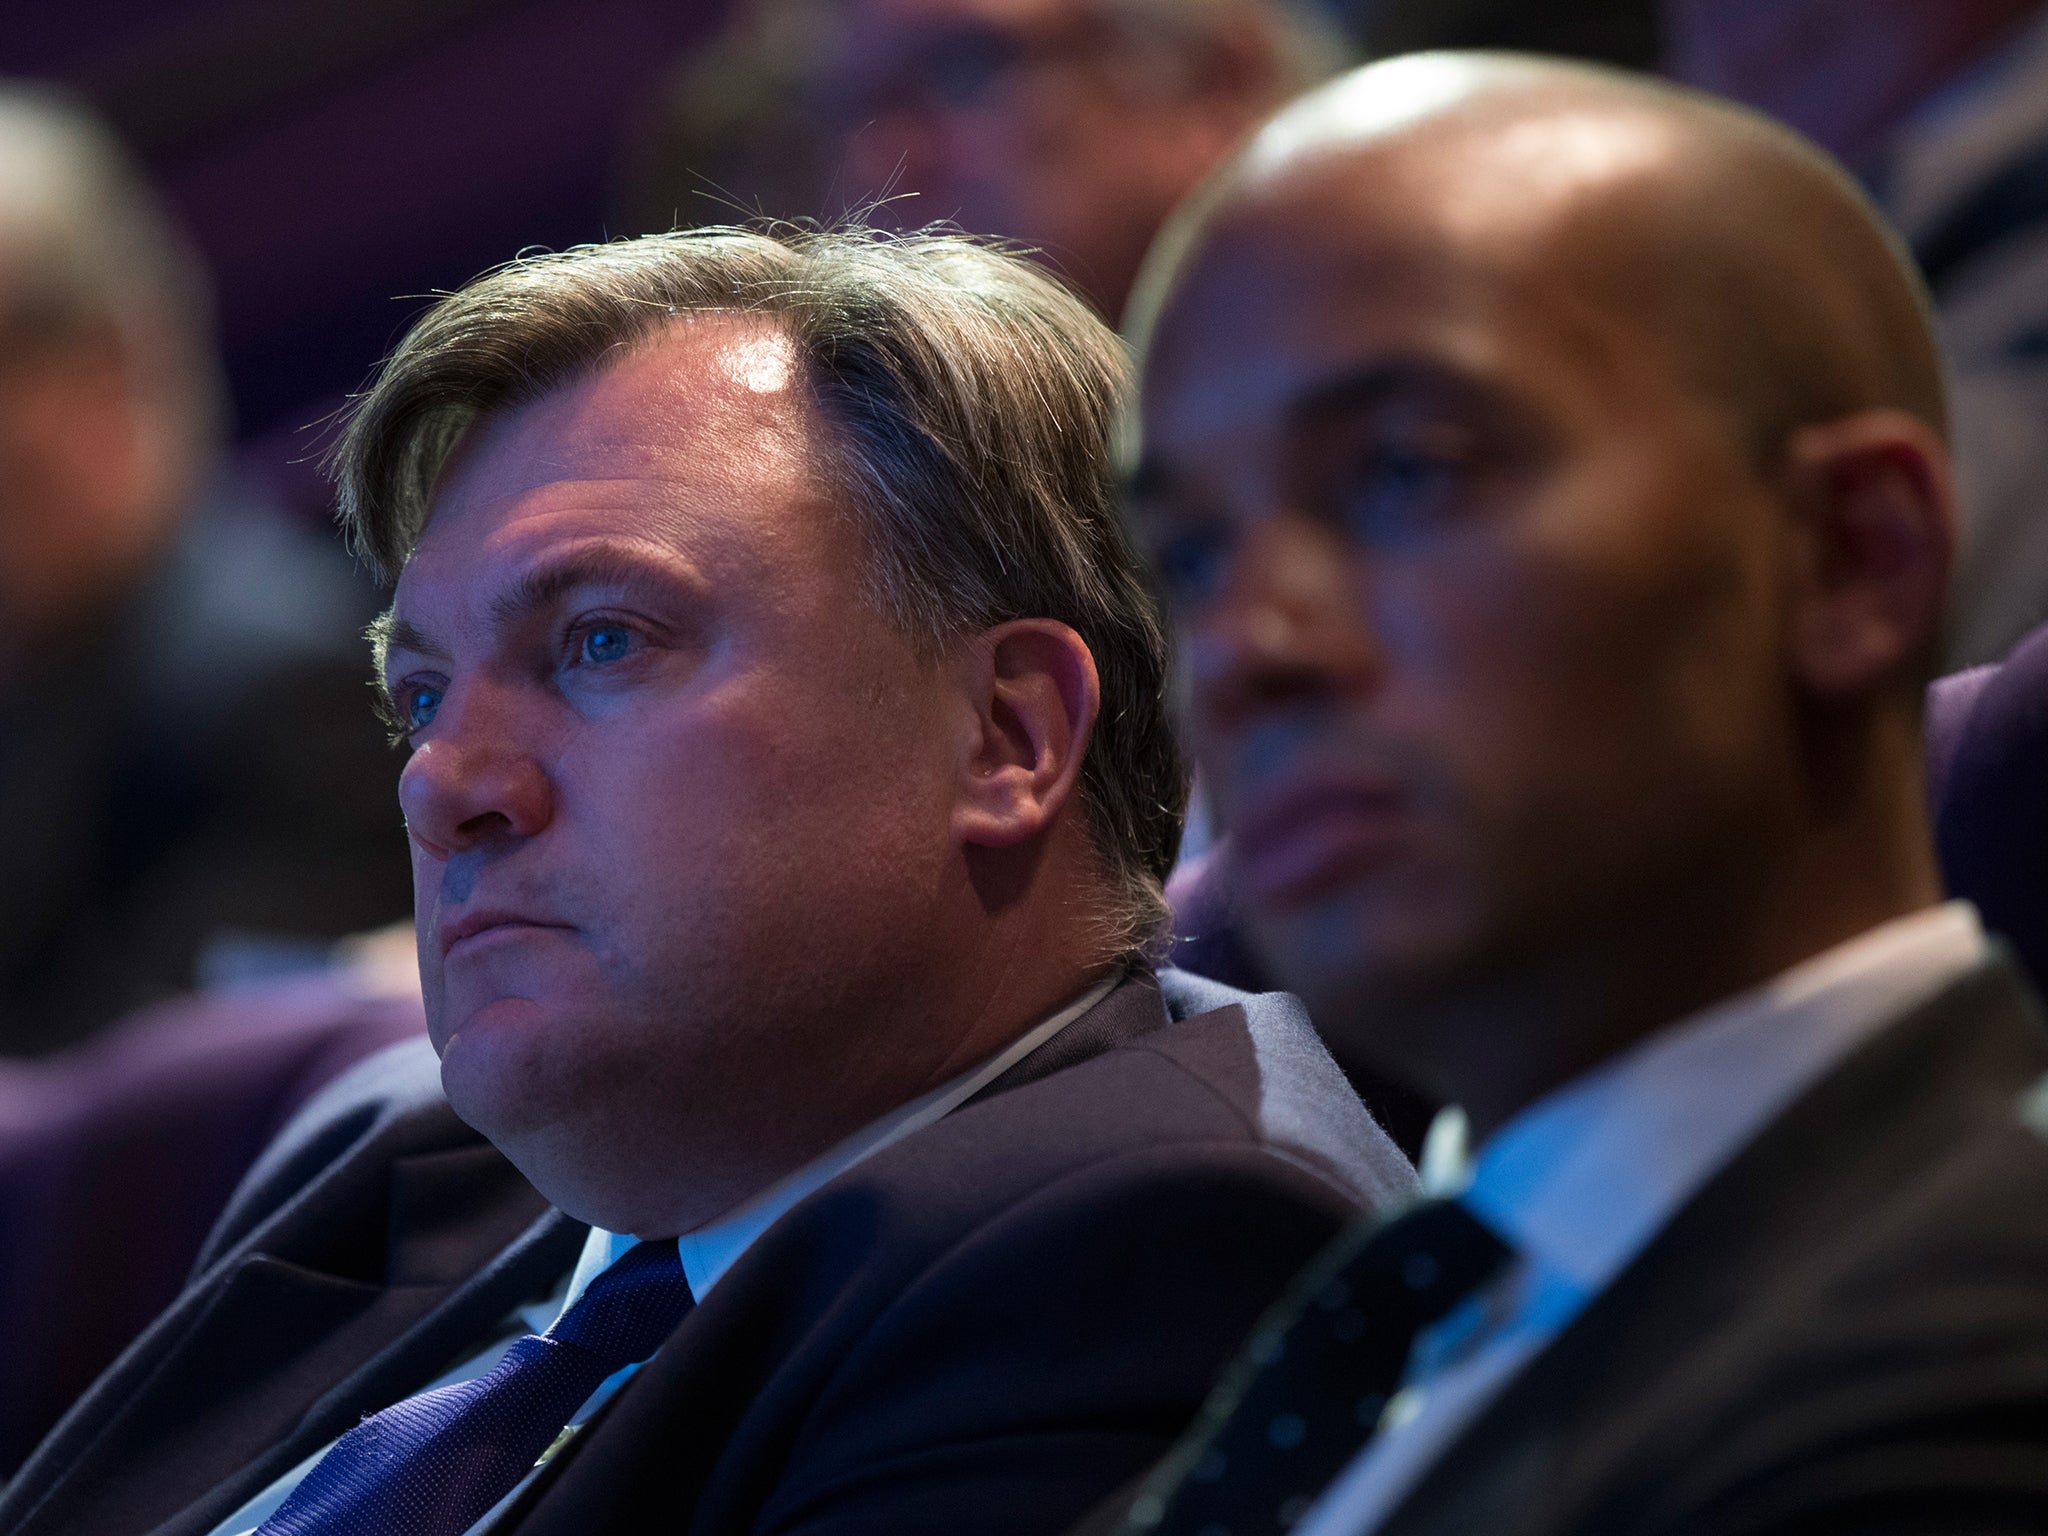 Ed Balls, left, and Chuka Umunna will issue a positive pro-business message at the BCC this week